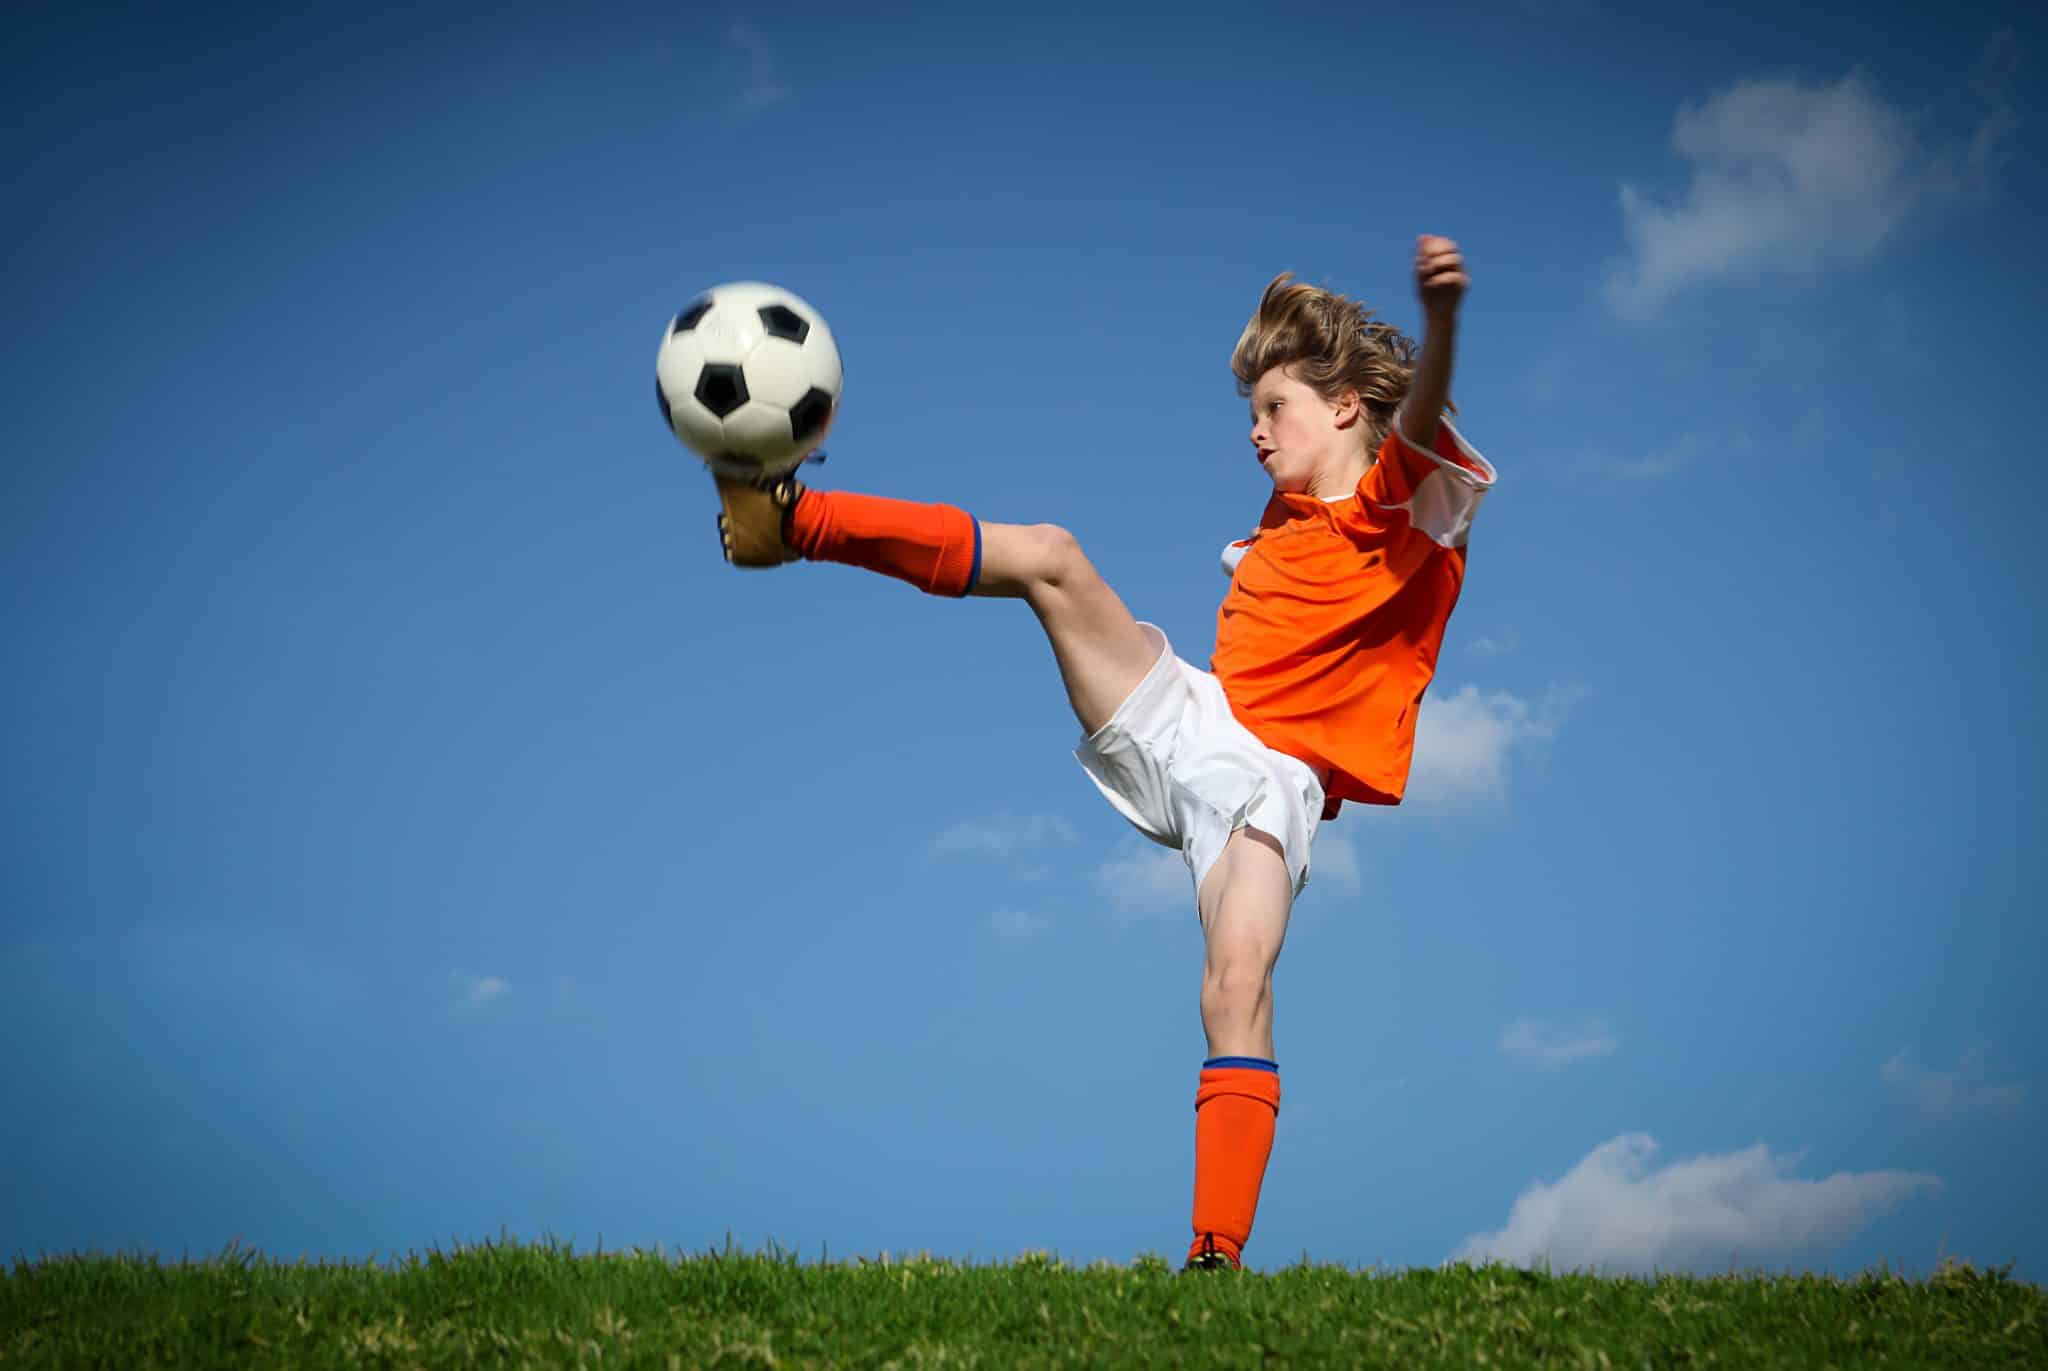 athletic child kicking a soccer ball in a field